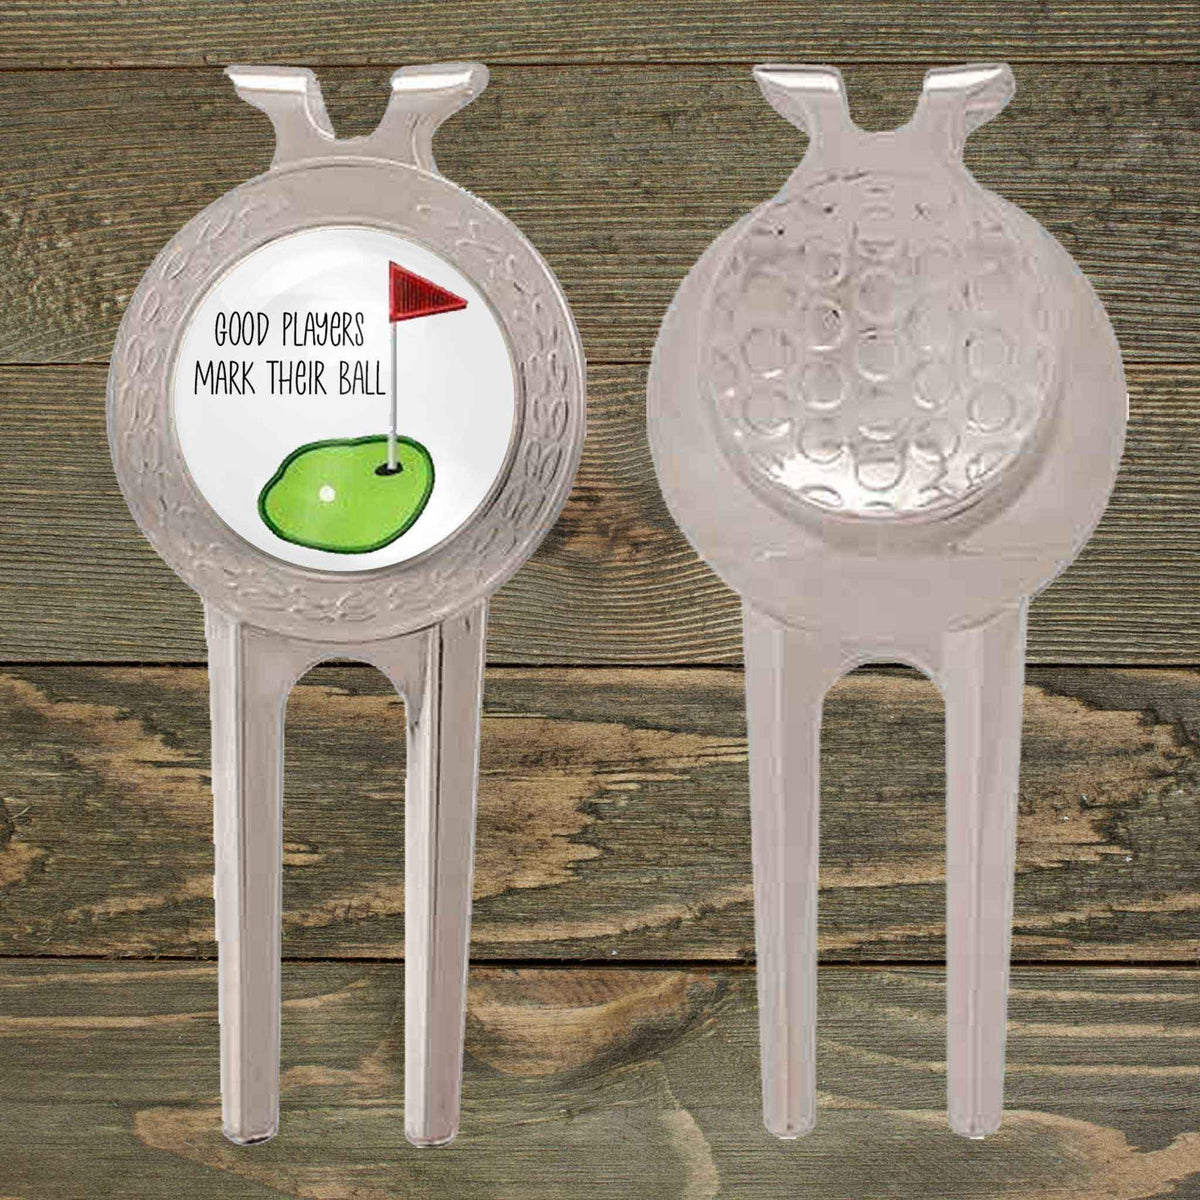 Personalized Divot Repair Tool | Golf Accessories | Golf Gifts | Good Players Mark Their Ball